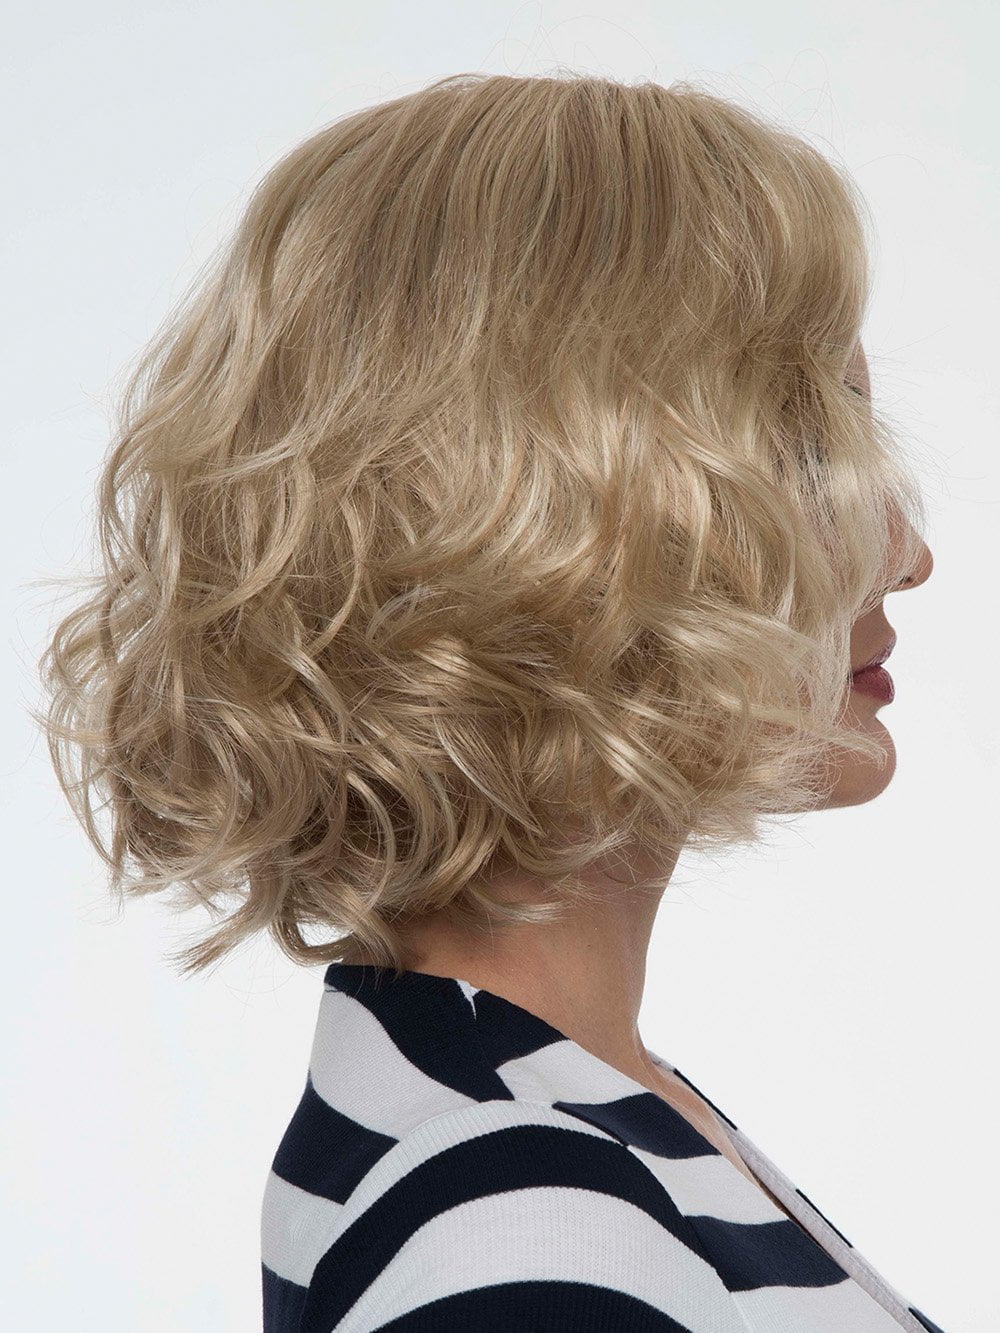 Embraces that retro glam look in this bouncy, mid-length "bob." 